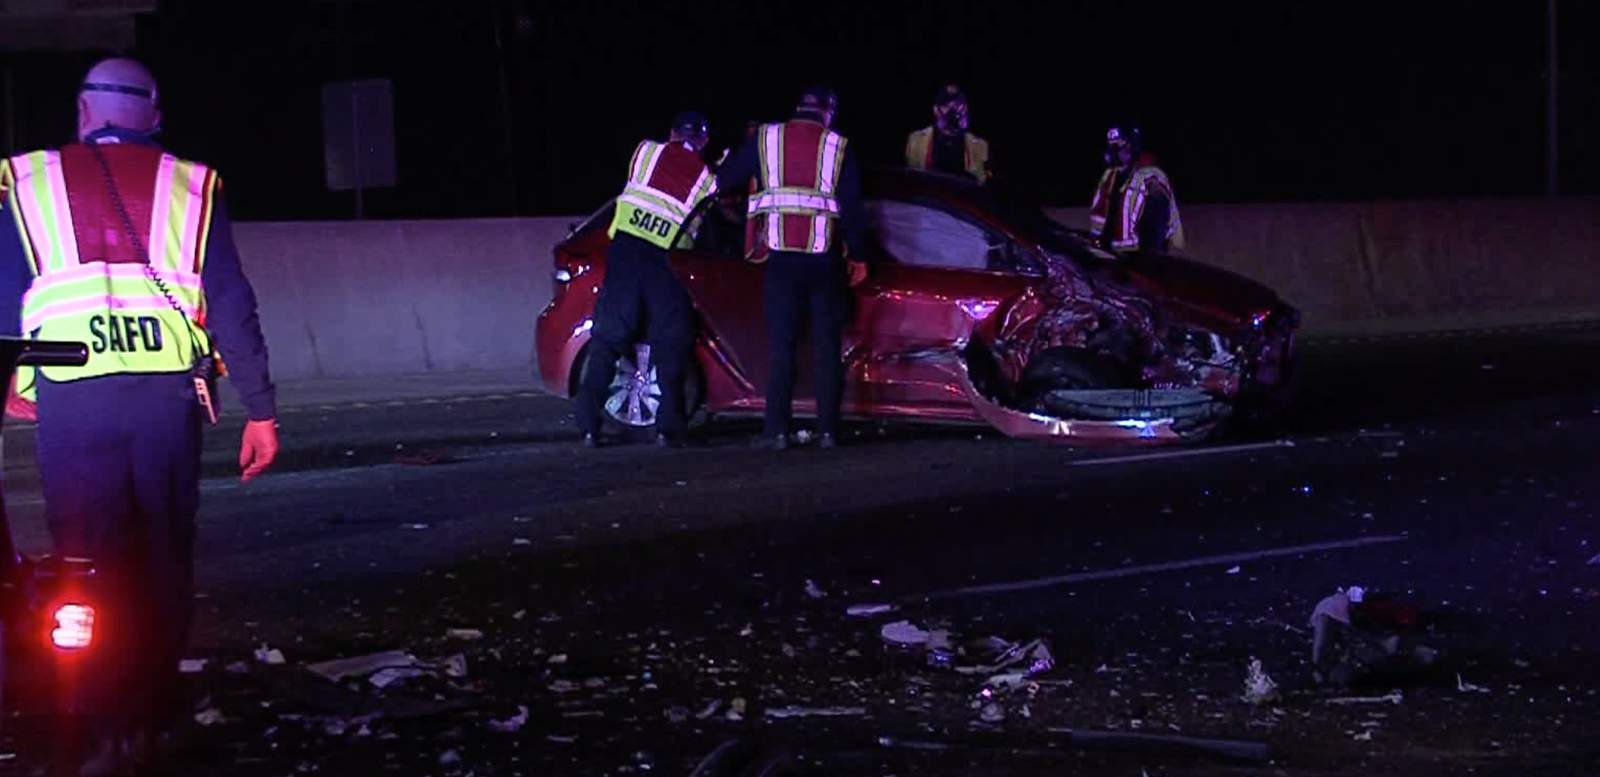 Wrong-way driver faces possible DWI charge after crashing head-on with vehicle, police say